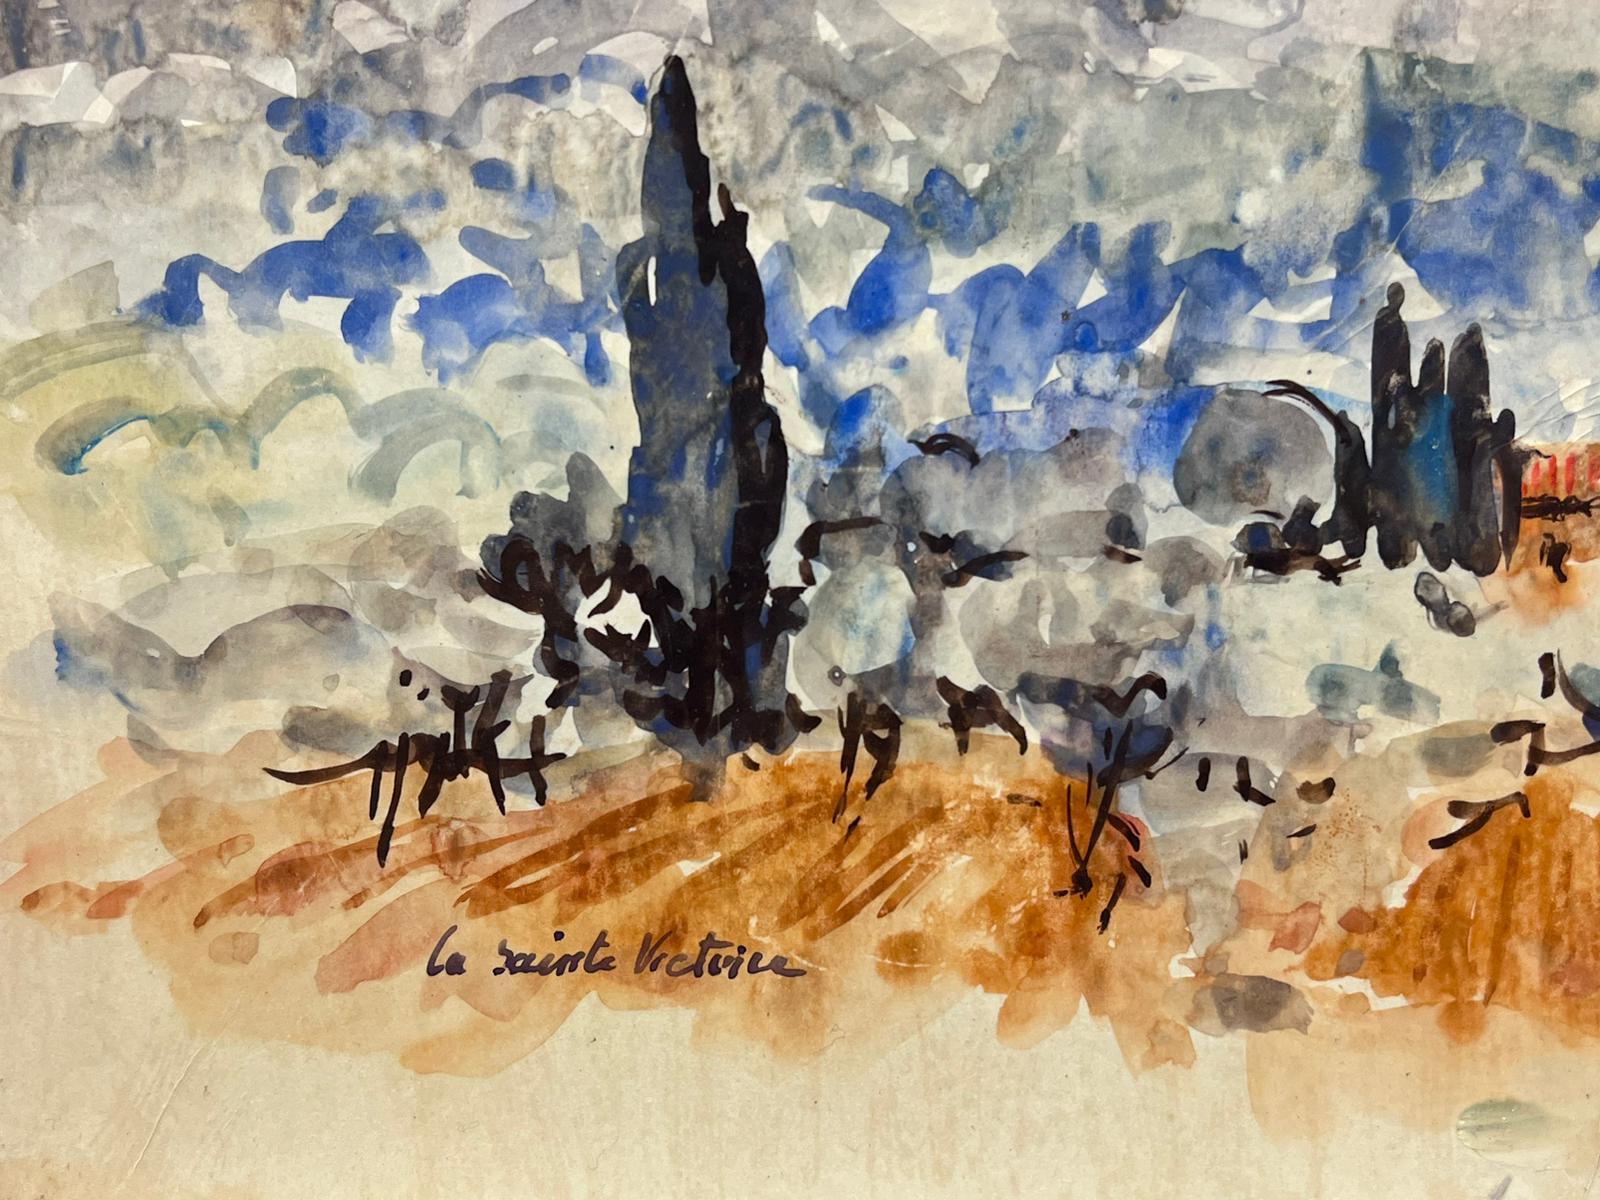 Jean La Forgue (French 1901-1975)
signed watercolour on paper, unframed
painting: 15 x 21 inches
provenance: the artists estate, France
condition: very good and sound condition; there are minor age related marks and stains to the surface simply